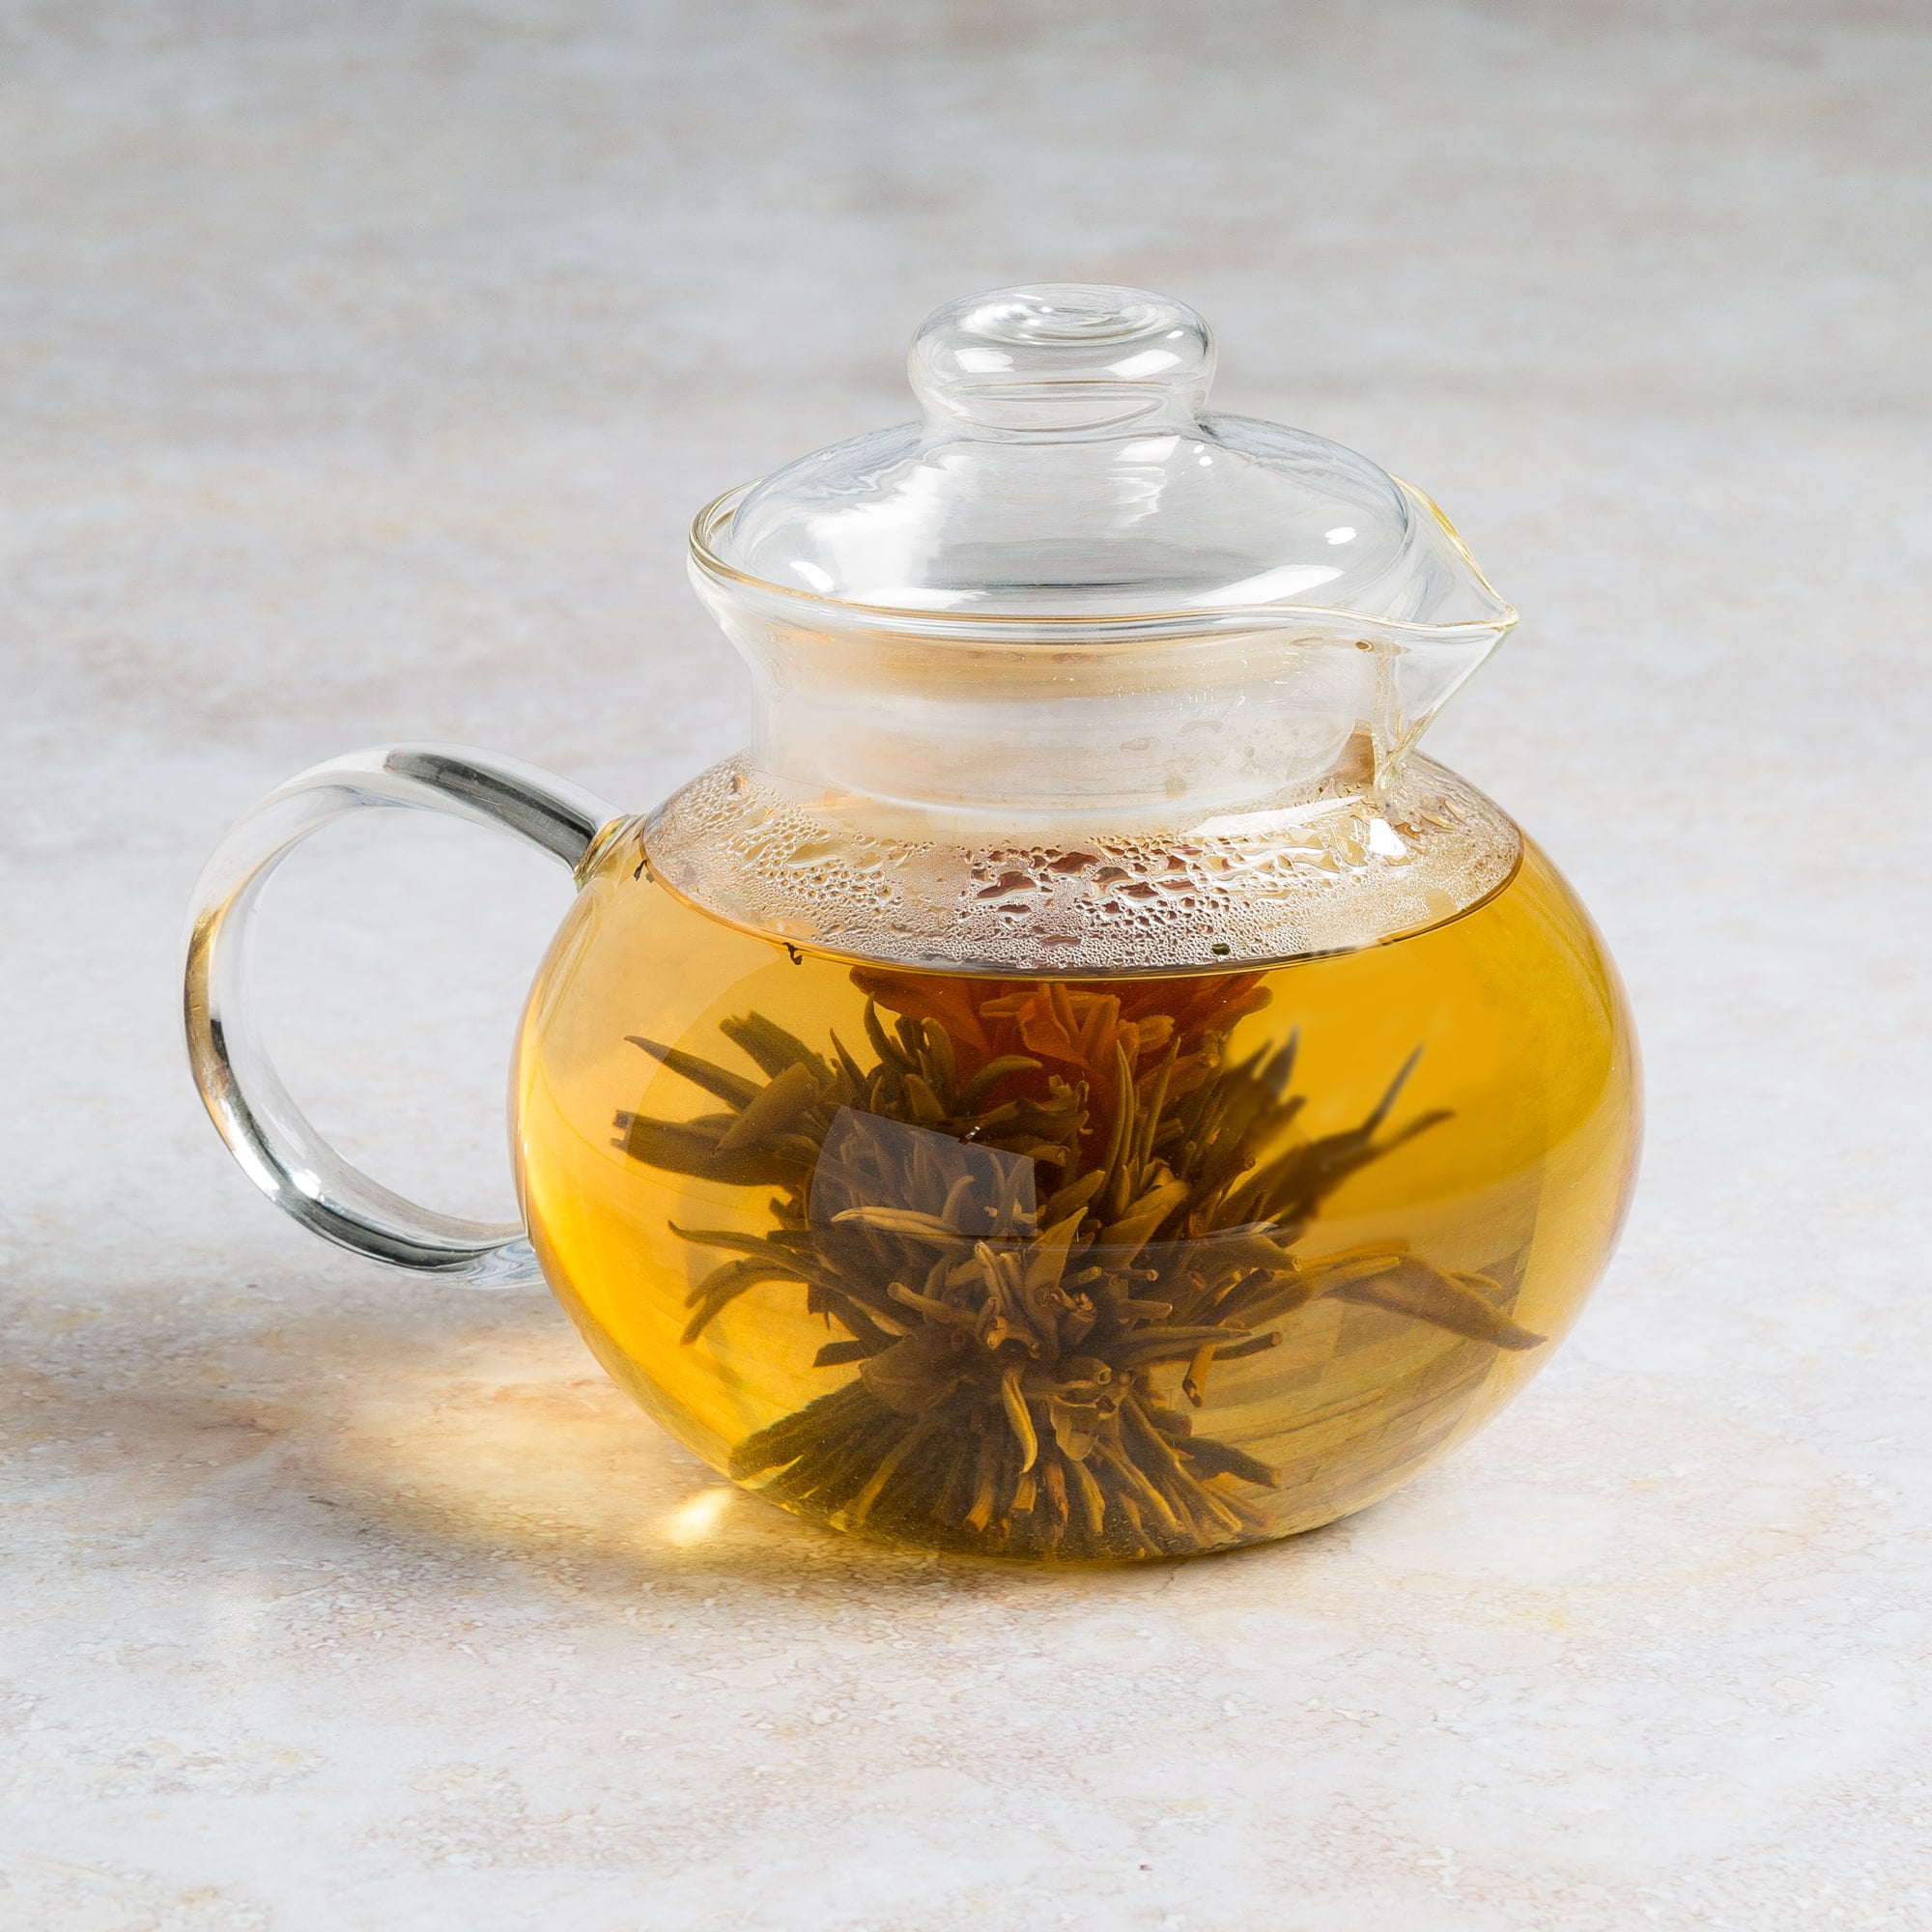 Teabloom Wings of Love Teapot - 40 oz. Borosilicate Glass  Butterfly Teapot, Loose Leaf Tea Glass Infuser - 2 Free Blooming Tea  Flowers included: Teapots